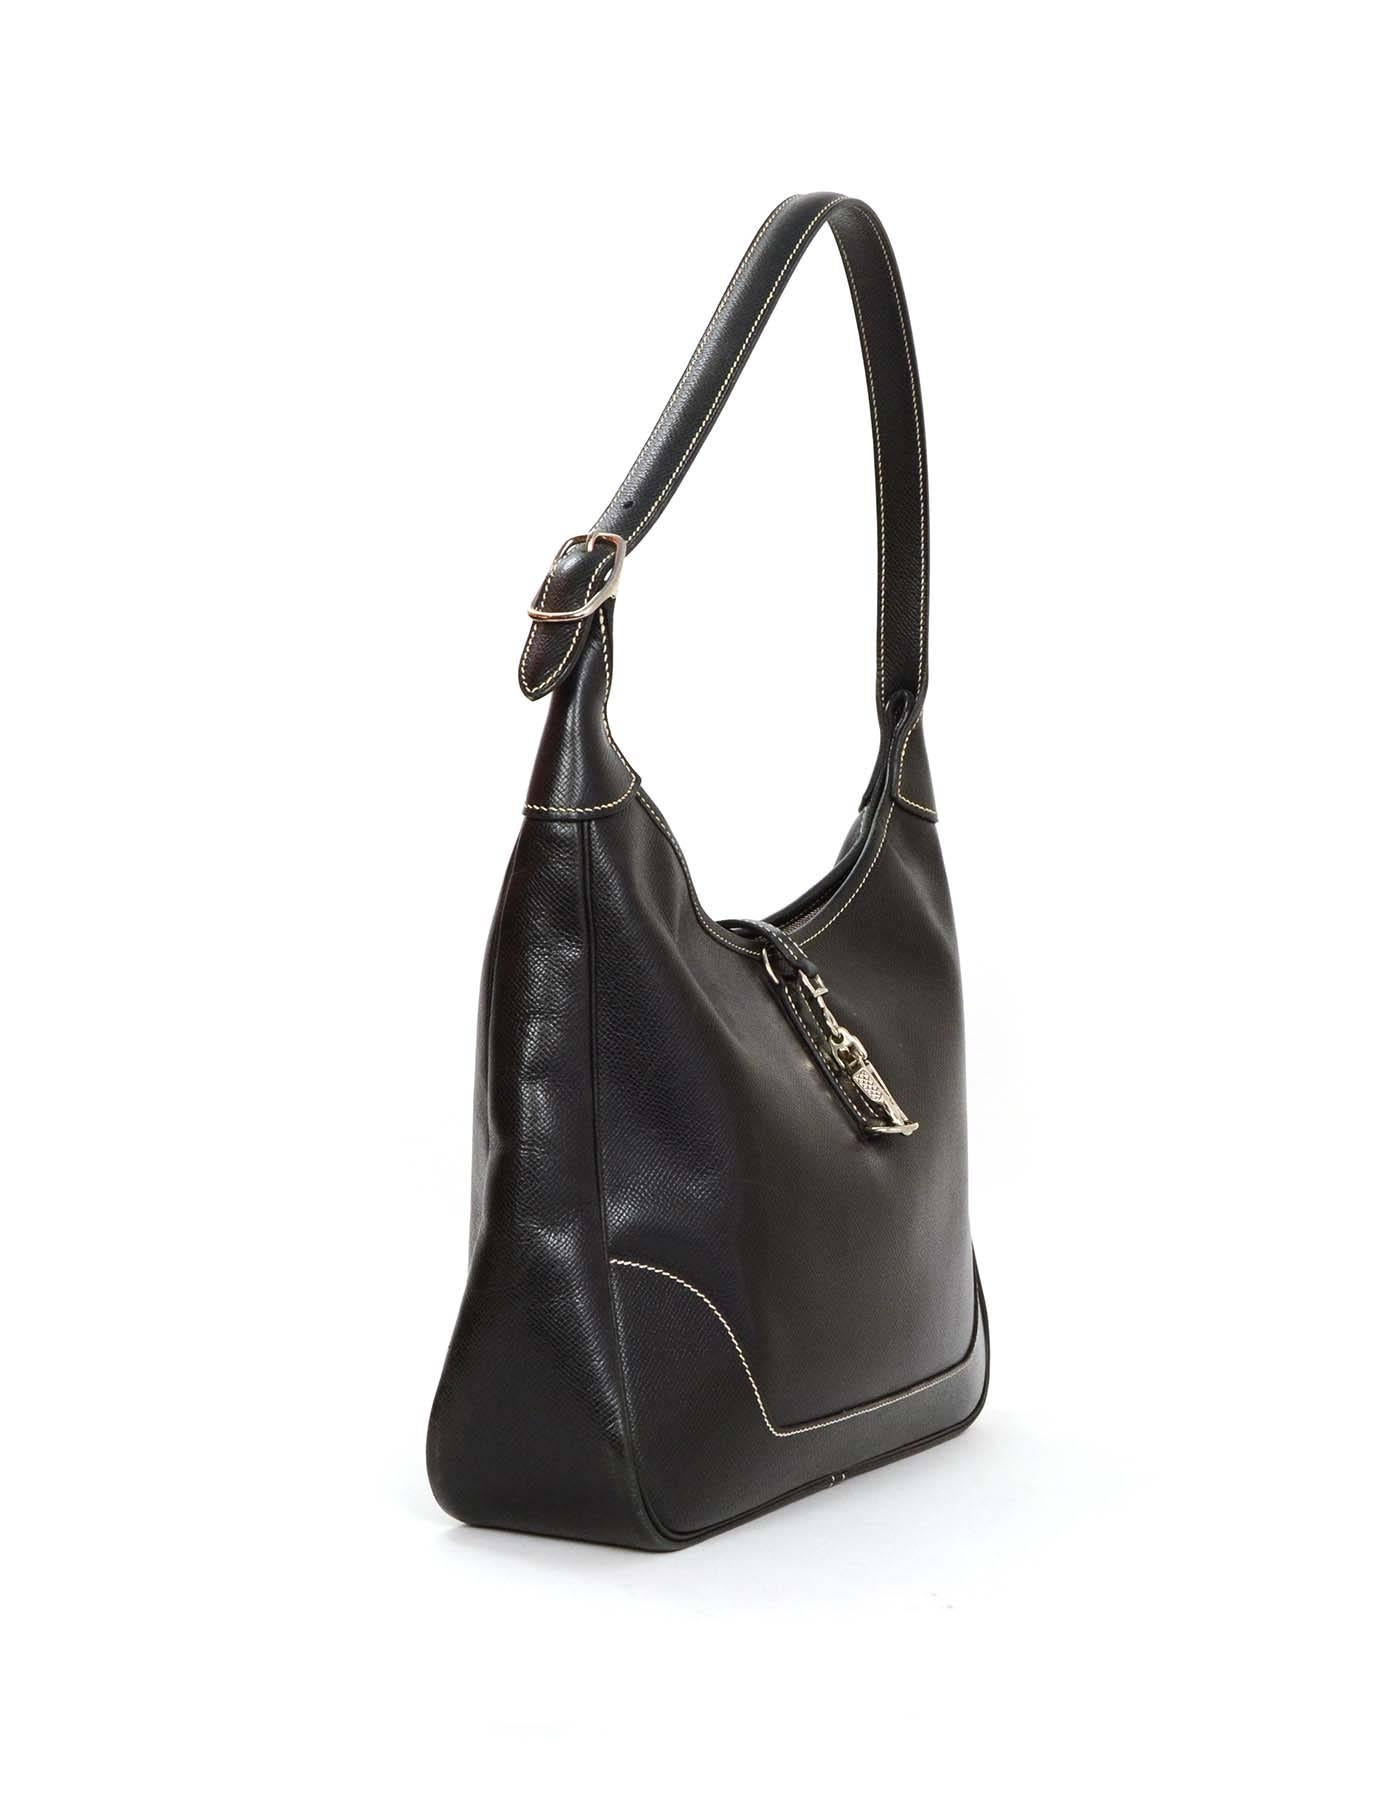 Hermes Black Epsom Shoulder Bag 31 CM PHW
Features contrasting white stitching and palladium hardware buckle clasp closure detailing at top front 
Made In: France
Year of Production: 2001
Color: Black
Hardware: Palladium
Materials: Epsom